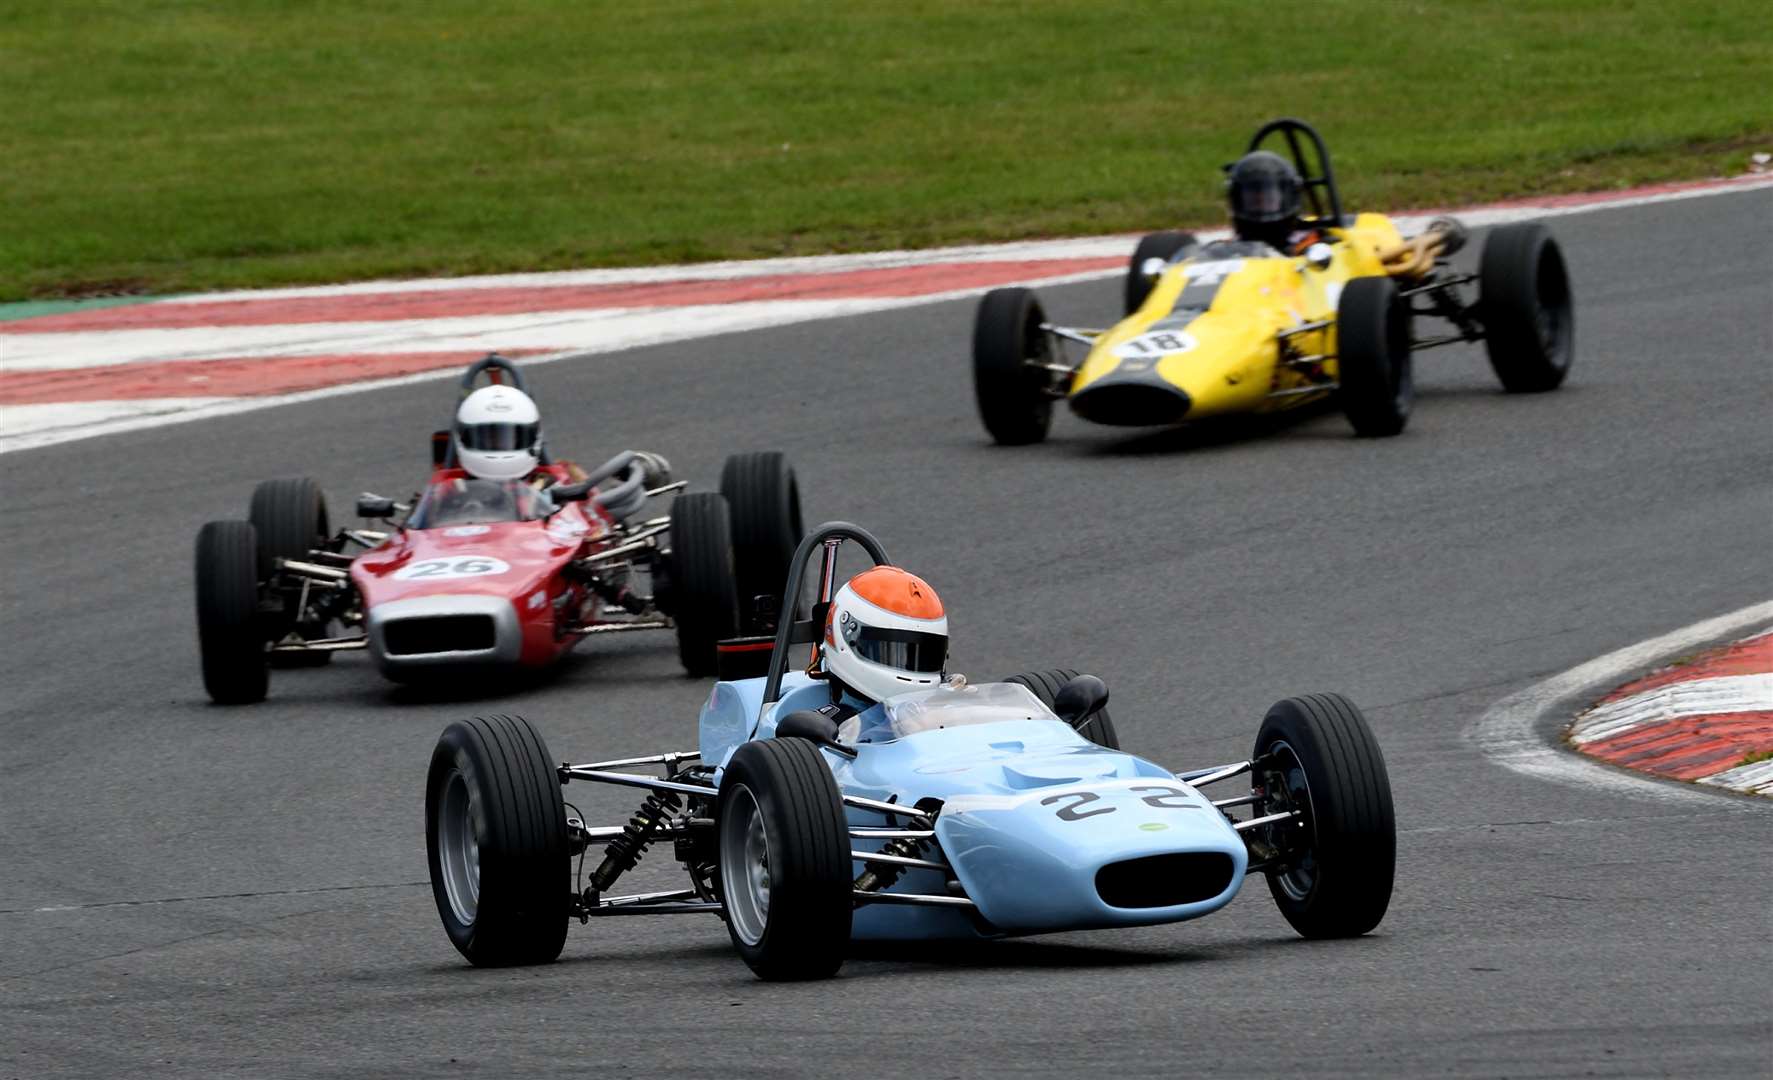 Tony's younger brother Tim drove for Ford in his early rally career and now handles a Merlyn Mk20 in the Historic Formula Ford Championship. He's pictured at Brands Hatch in July last year – the first event held after the original Covid-19 lockdown. Picture: Simon Hildrew